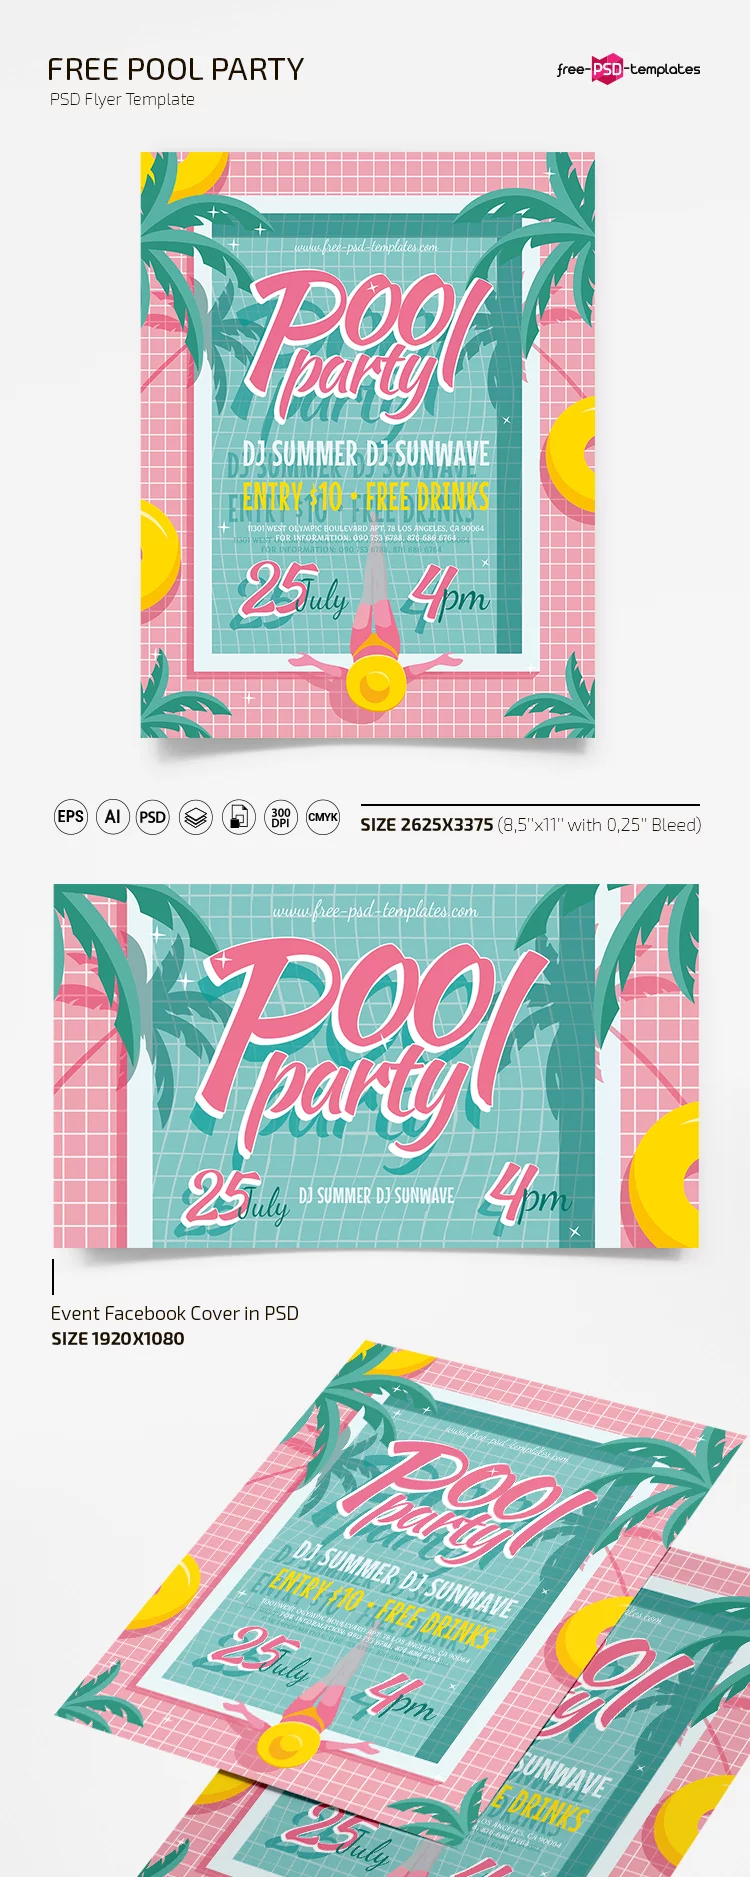 Free Pool Party Flyer Template in PSD + AI